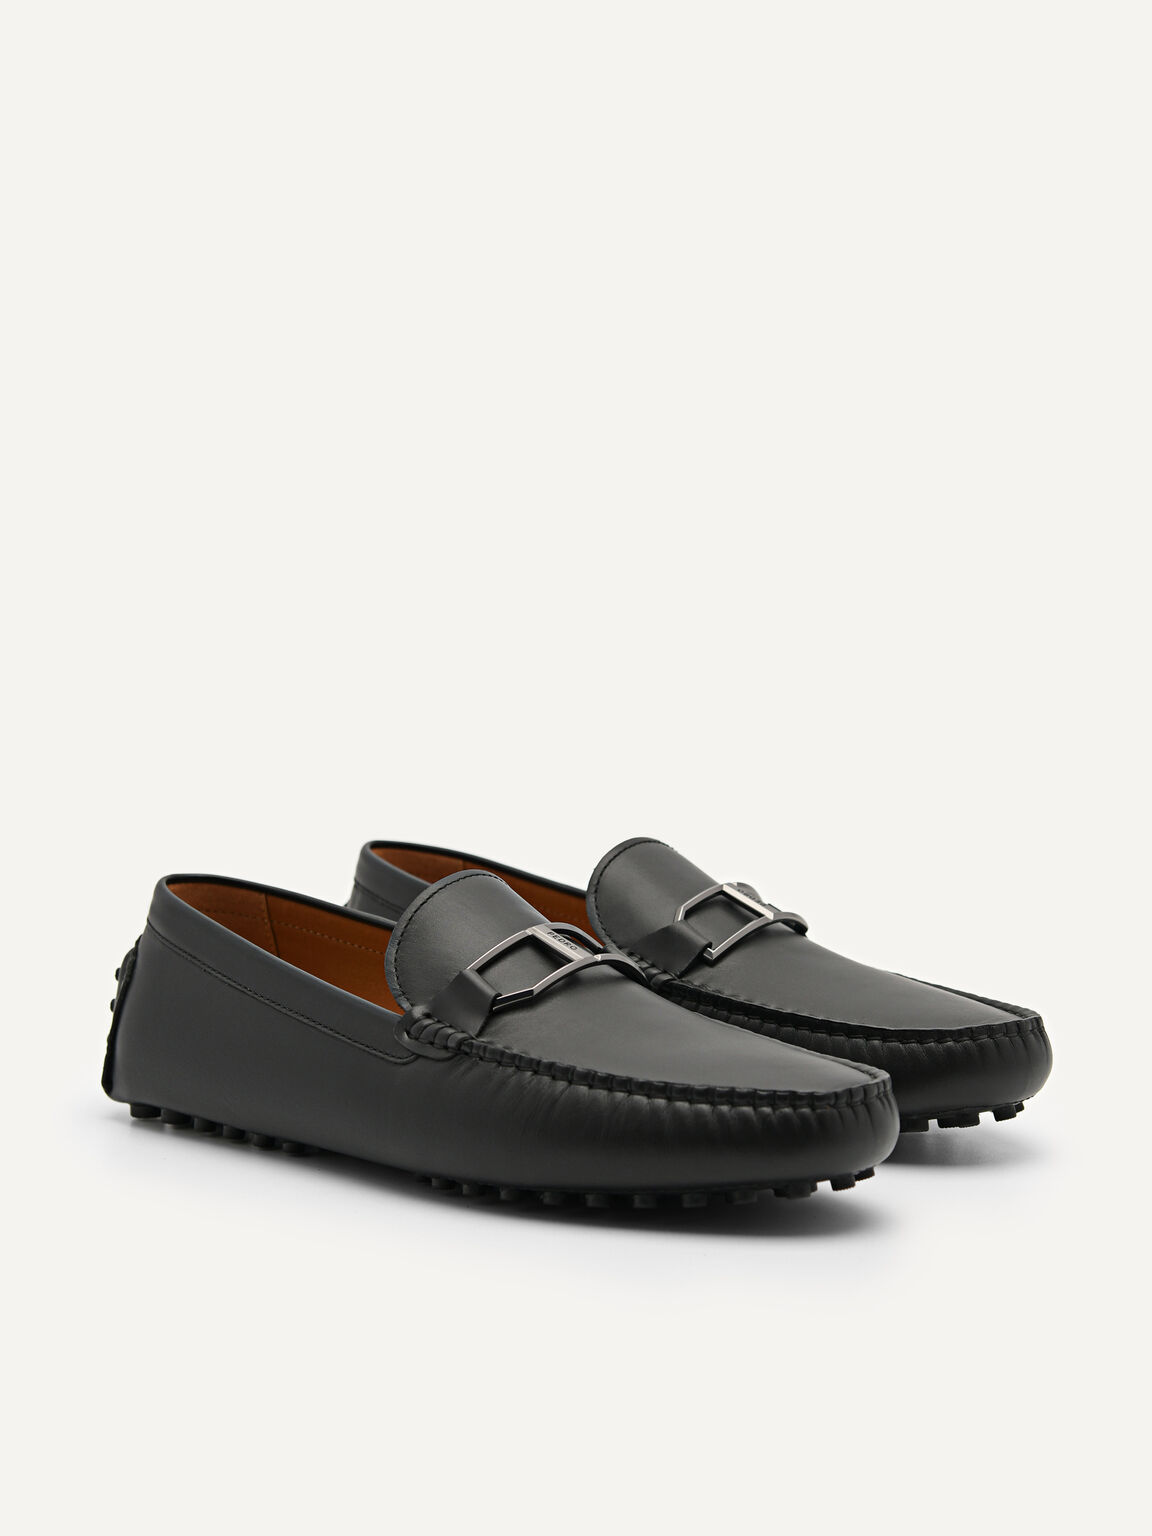 Leather Buckle Moccasins, Black